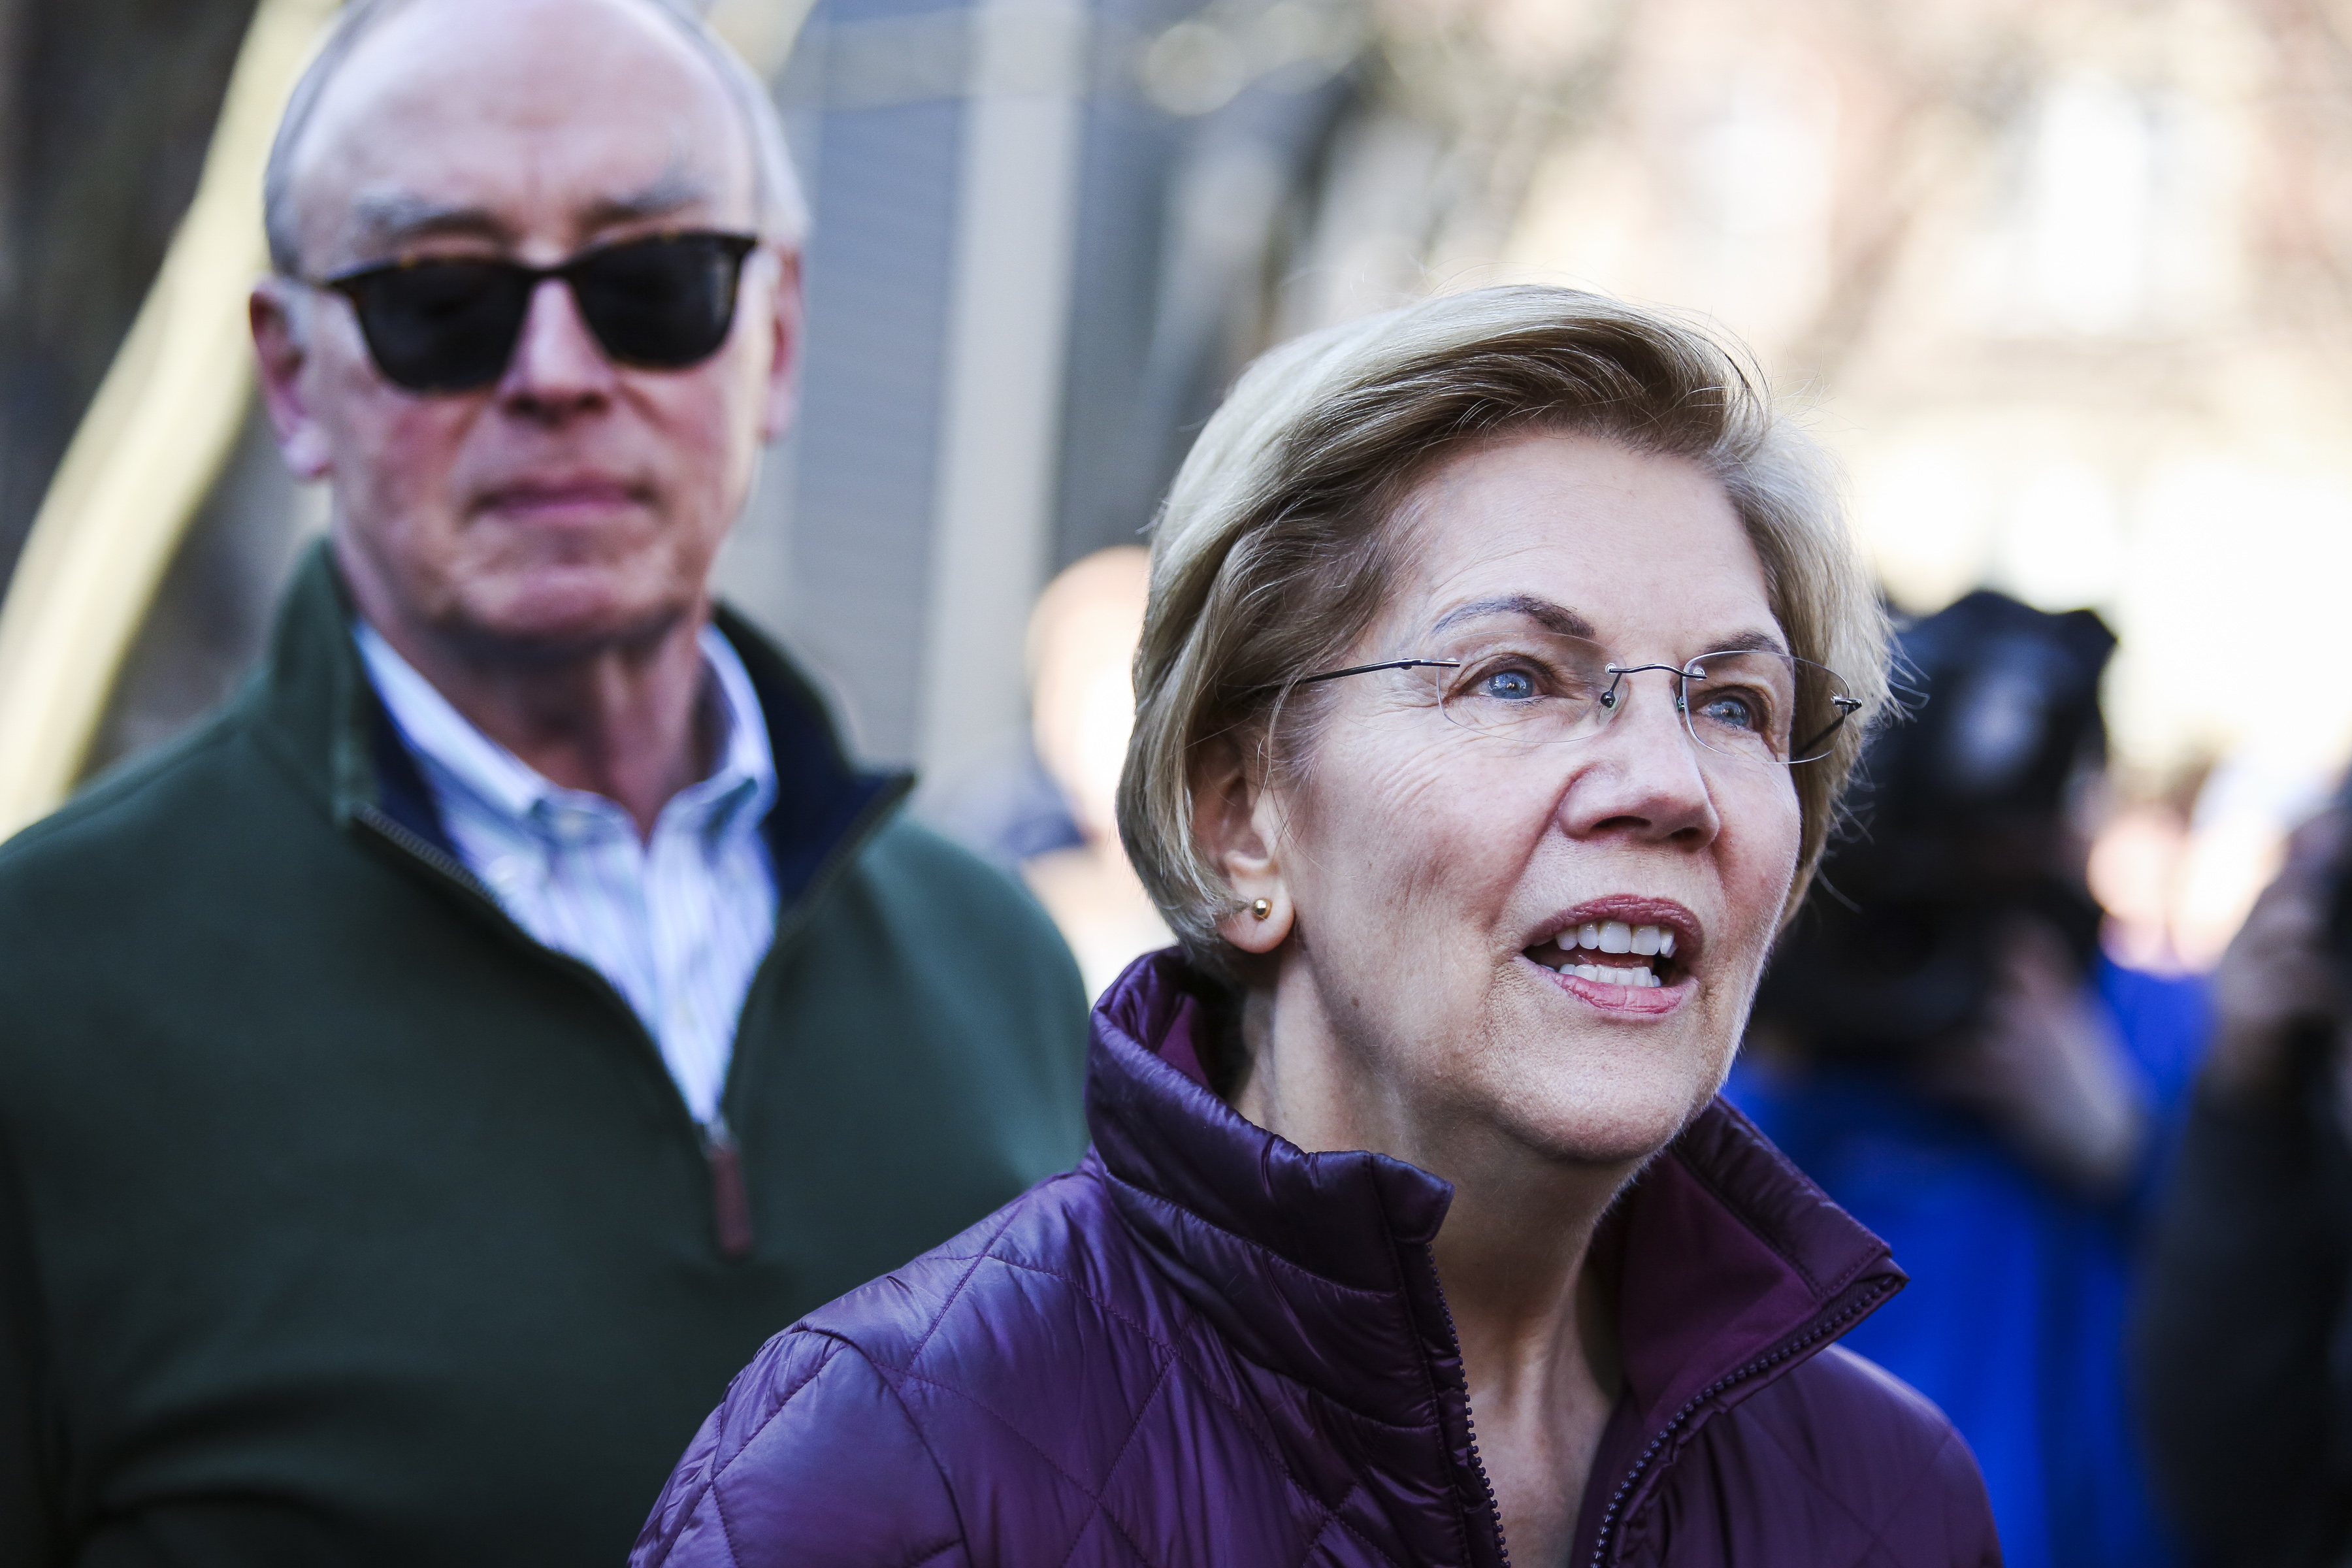 CAMBRIDGE, MA - MARCH 5: Senator Elizabeth Warren addresses the media hours after dropping out of the Democratic presidential race in Cambridge, MA on March 5, 2020. I will not be running for